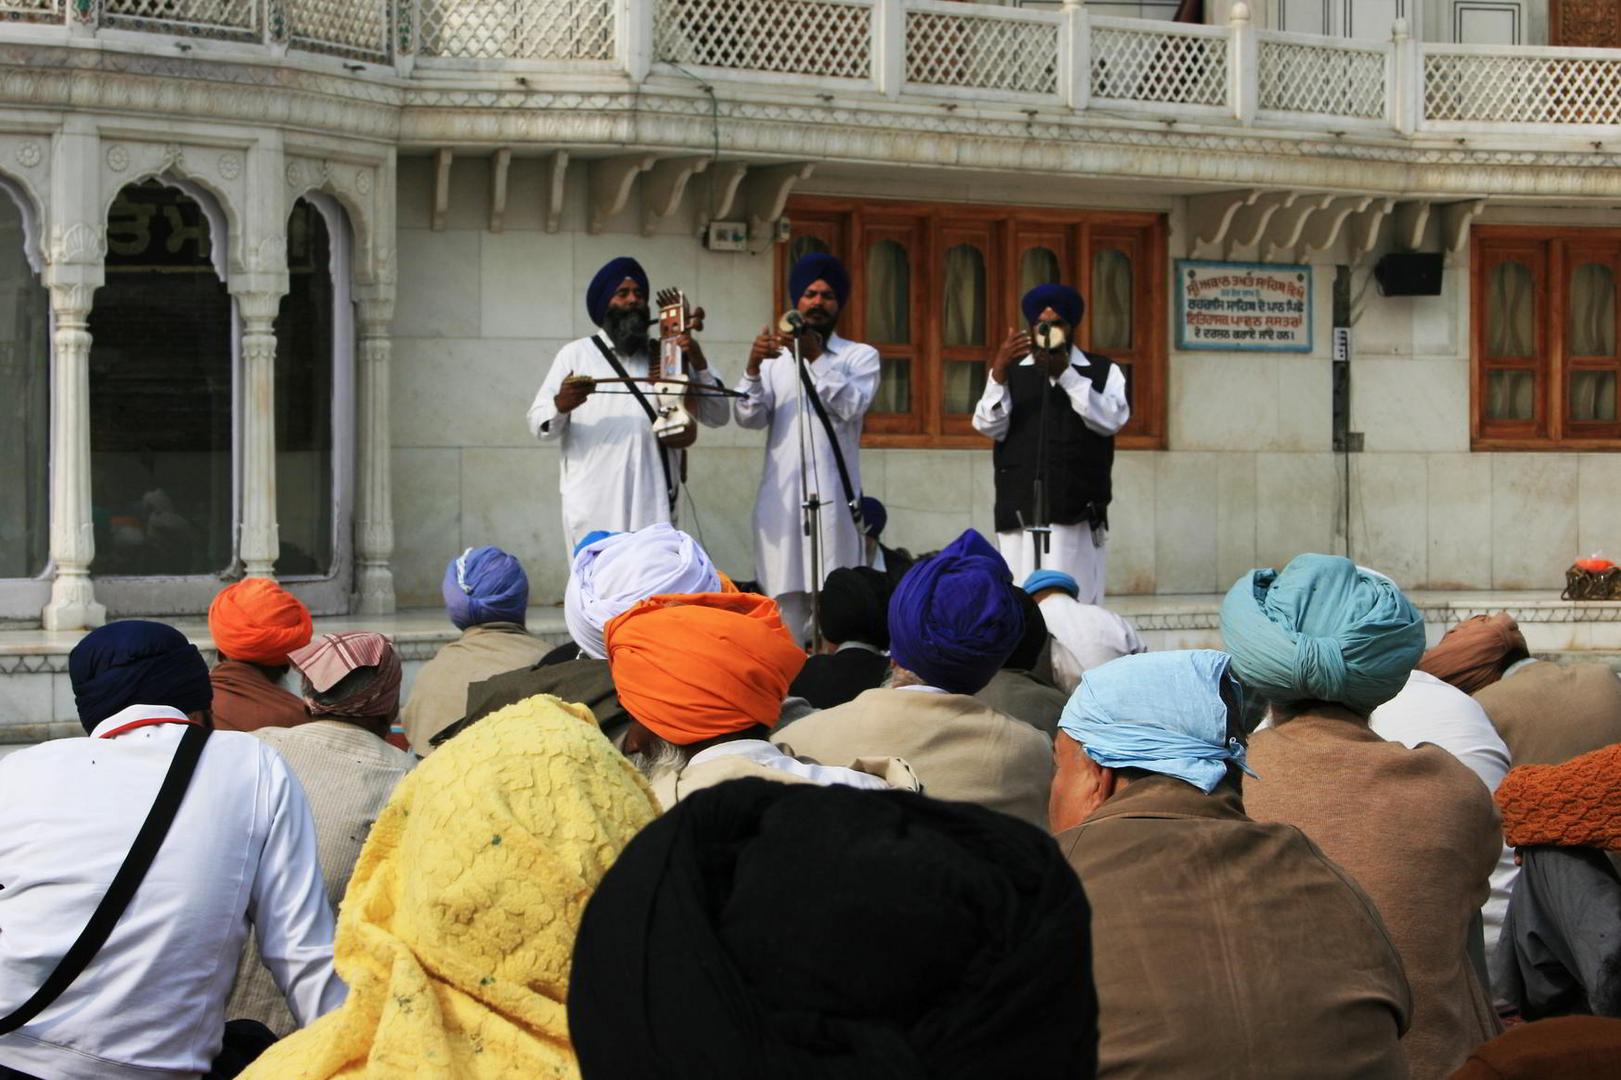 Seen the traditional musicians of the Golden Temple in Amritsar